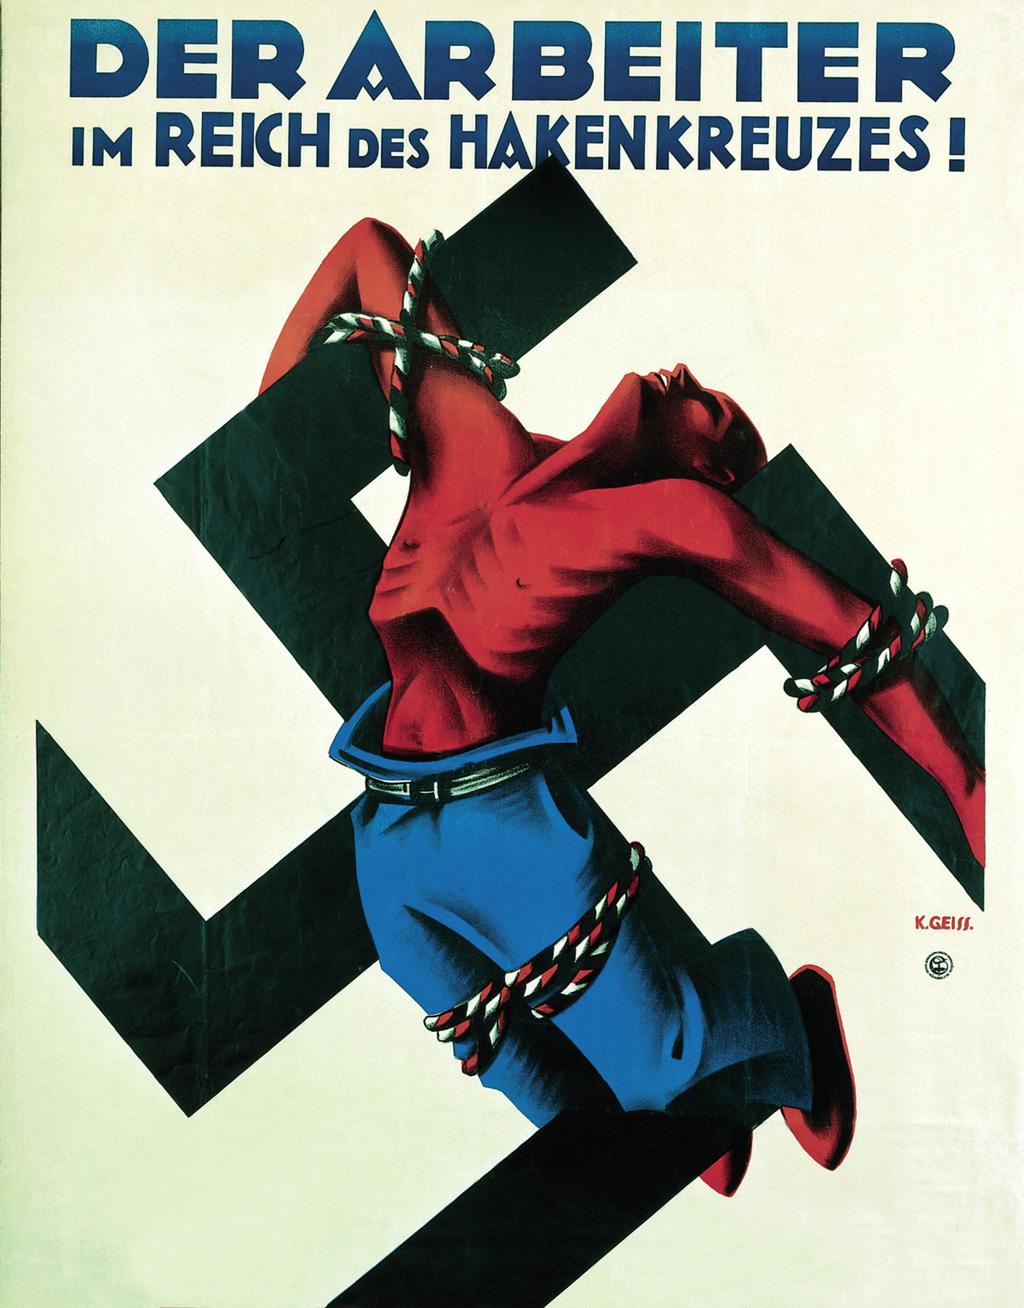 9 SOURCE C A poster published by the Social Democrats in 1932 entitled, The worker in the empire of the swastika. SOURCE D This year has ended badly for us.